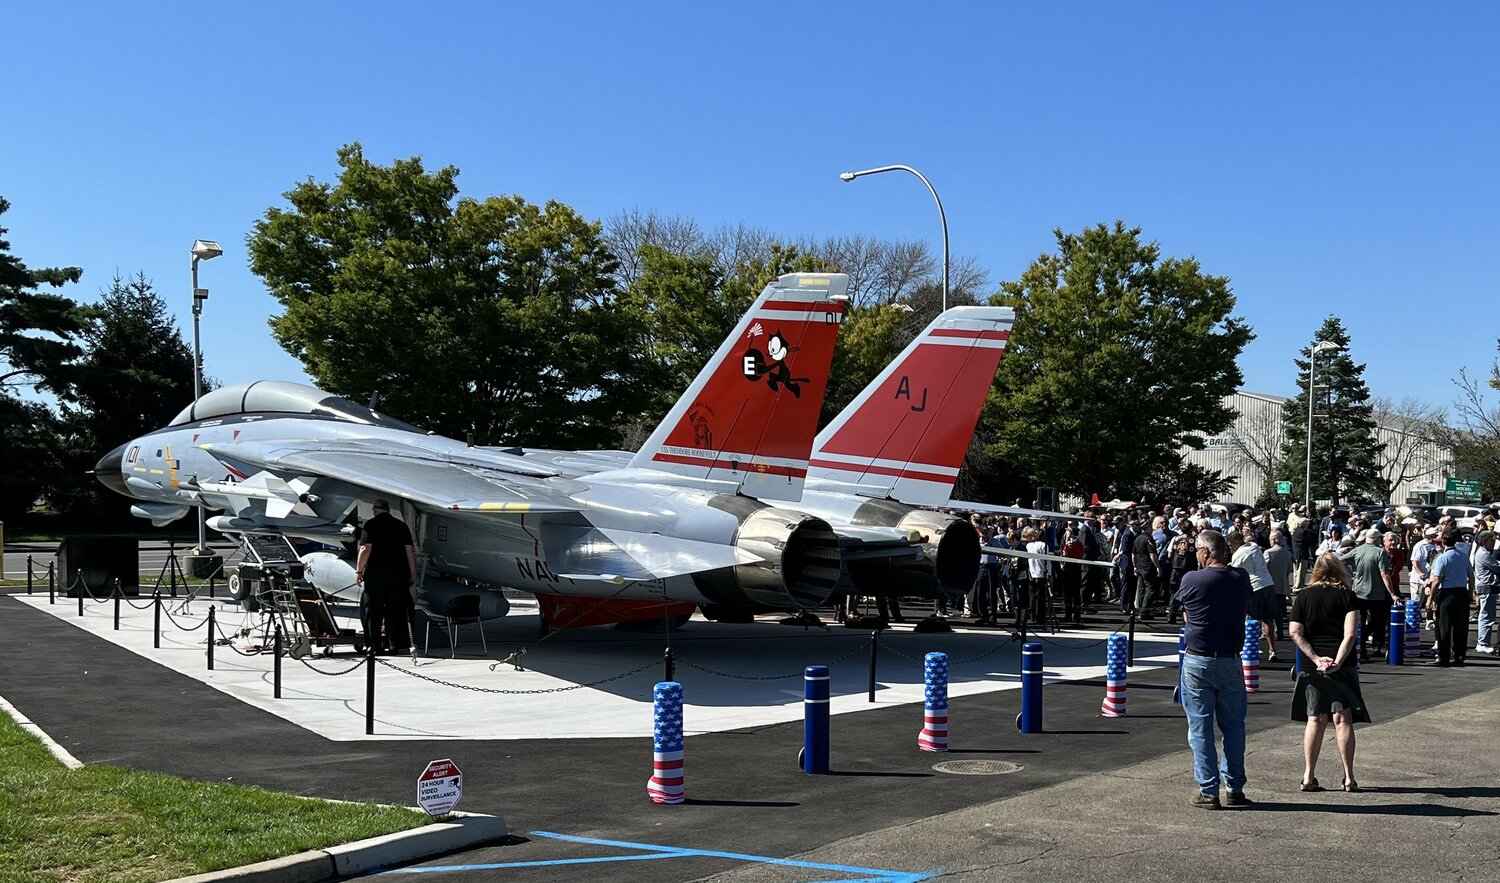 Dignitaries, veterans and restoration volunteers gathered on Sept. 14 to celebrate the addition of “Felix,” an F14 Tomcat fighter plane, to the Cradle of Aviation Museum in Uniondale.